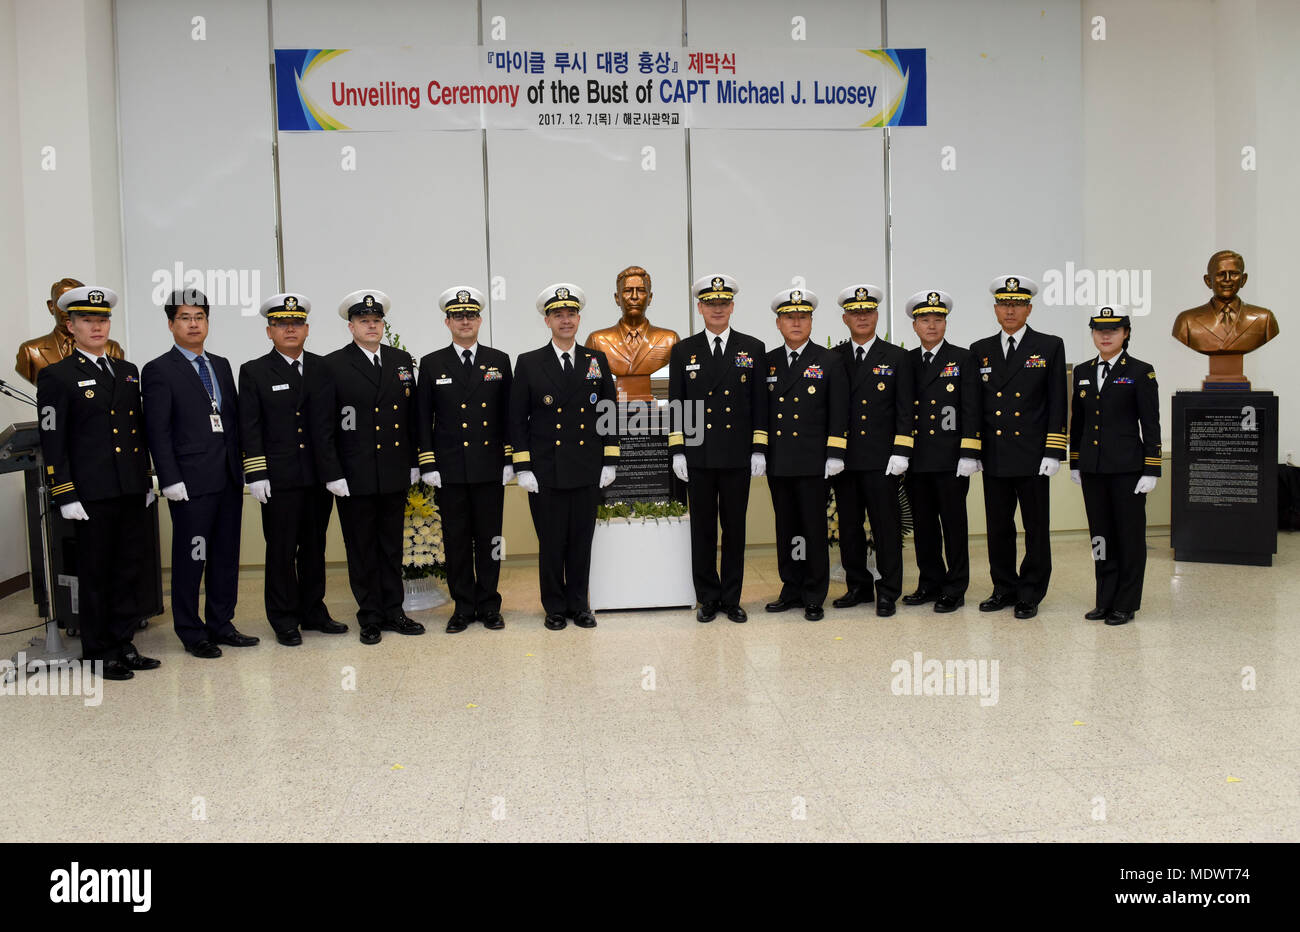 171207-N-TB148-089 CHINHAE, Republic of Korea (Dec. 07, 2017) Rear Adm. Brad Cooper, commander, U.S. Naval Forces Korea (CNFK), attends the unveiling of the Capt. Michael Lousey memorial bust unveiling ceremony at Republic of Korea (ROK) Naval Academy in Chinhae. CNFK is the U.S. Navy’s representative in the ROK, providing leadership and expertise in naval matters to improve institutional and operational effectiveness between the two navies and to strengthen collective security efforts in Korea and the region. (U.S. Navy photo by Mass Communication Specialist Seaman William Carlisle) Stock Photo